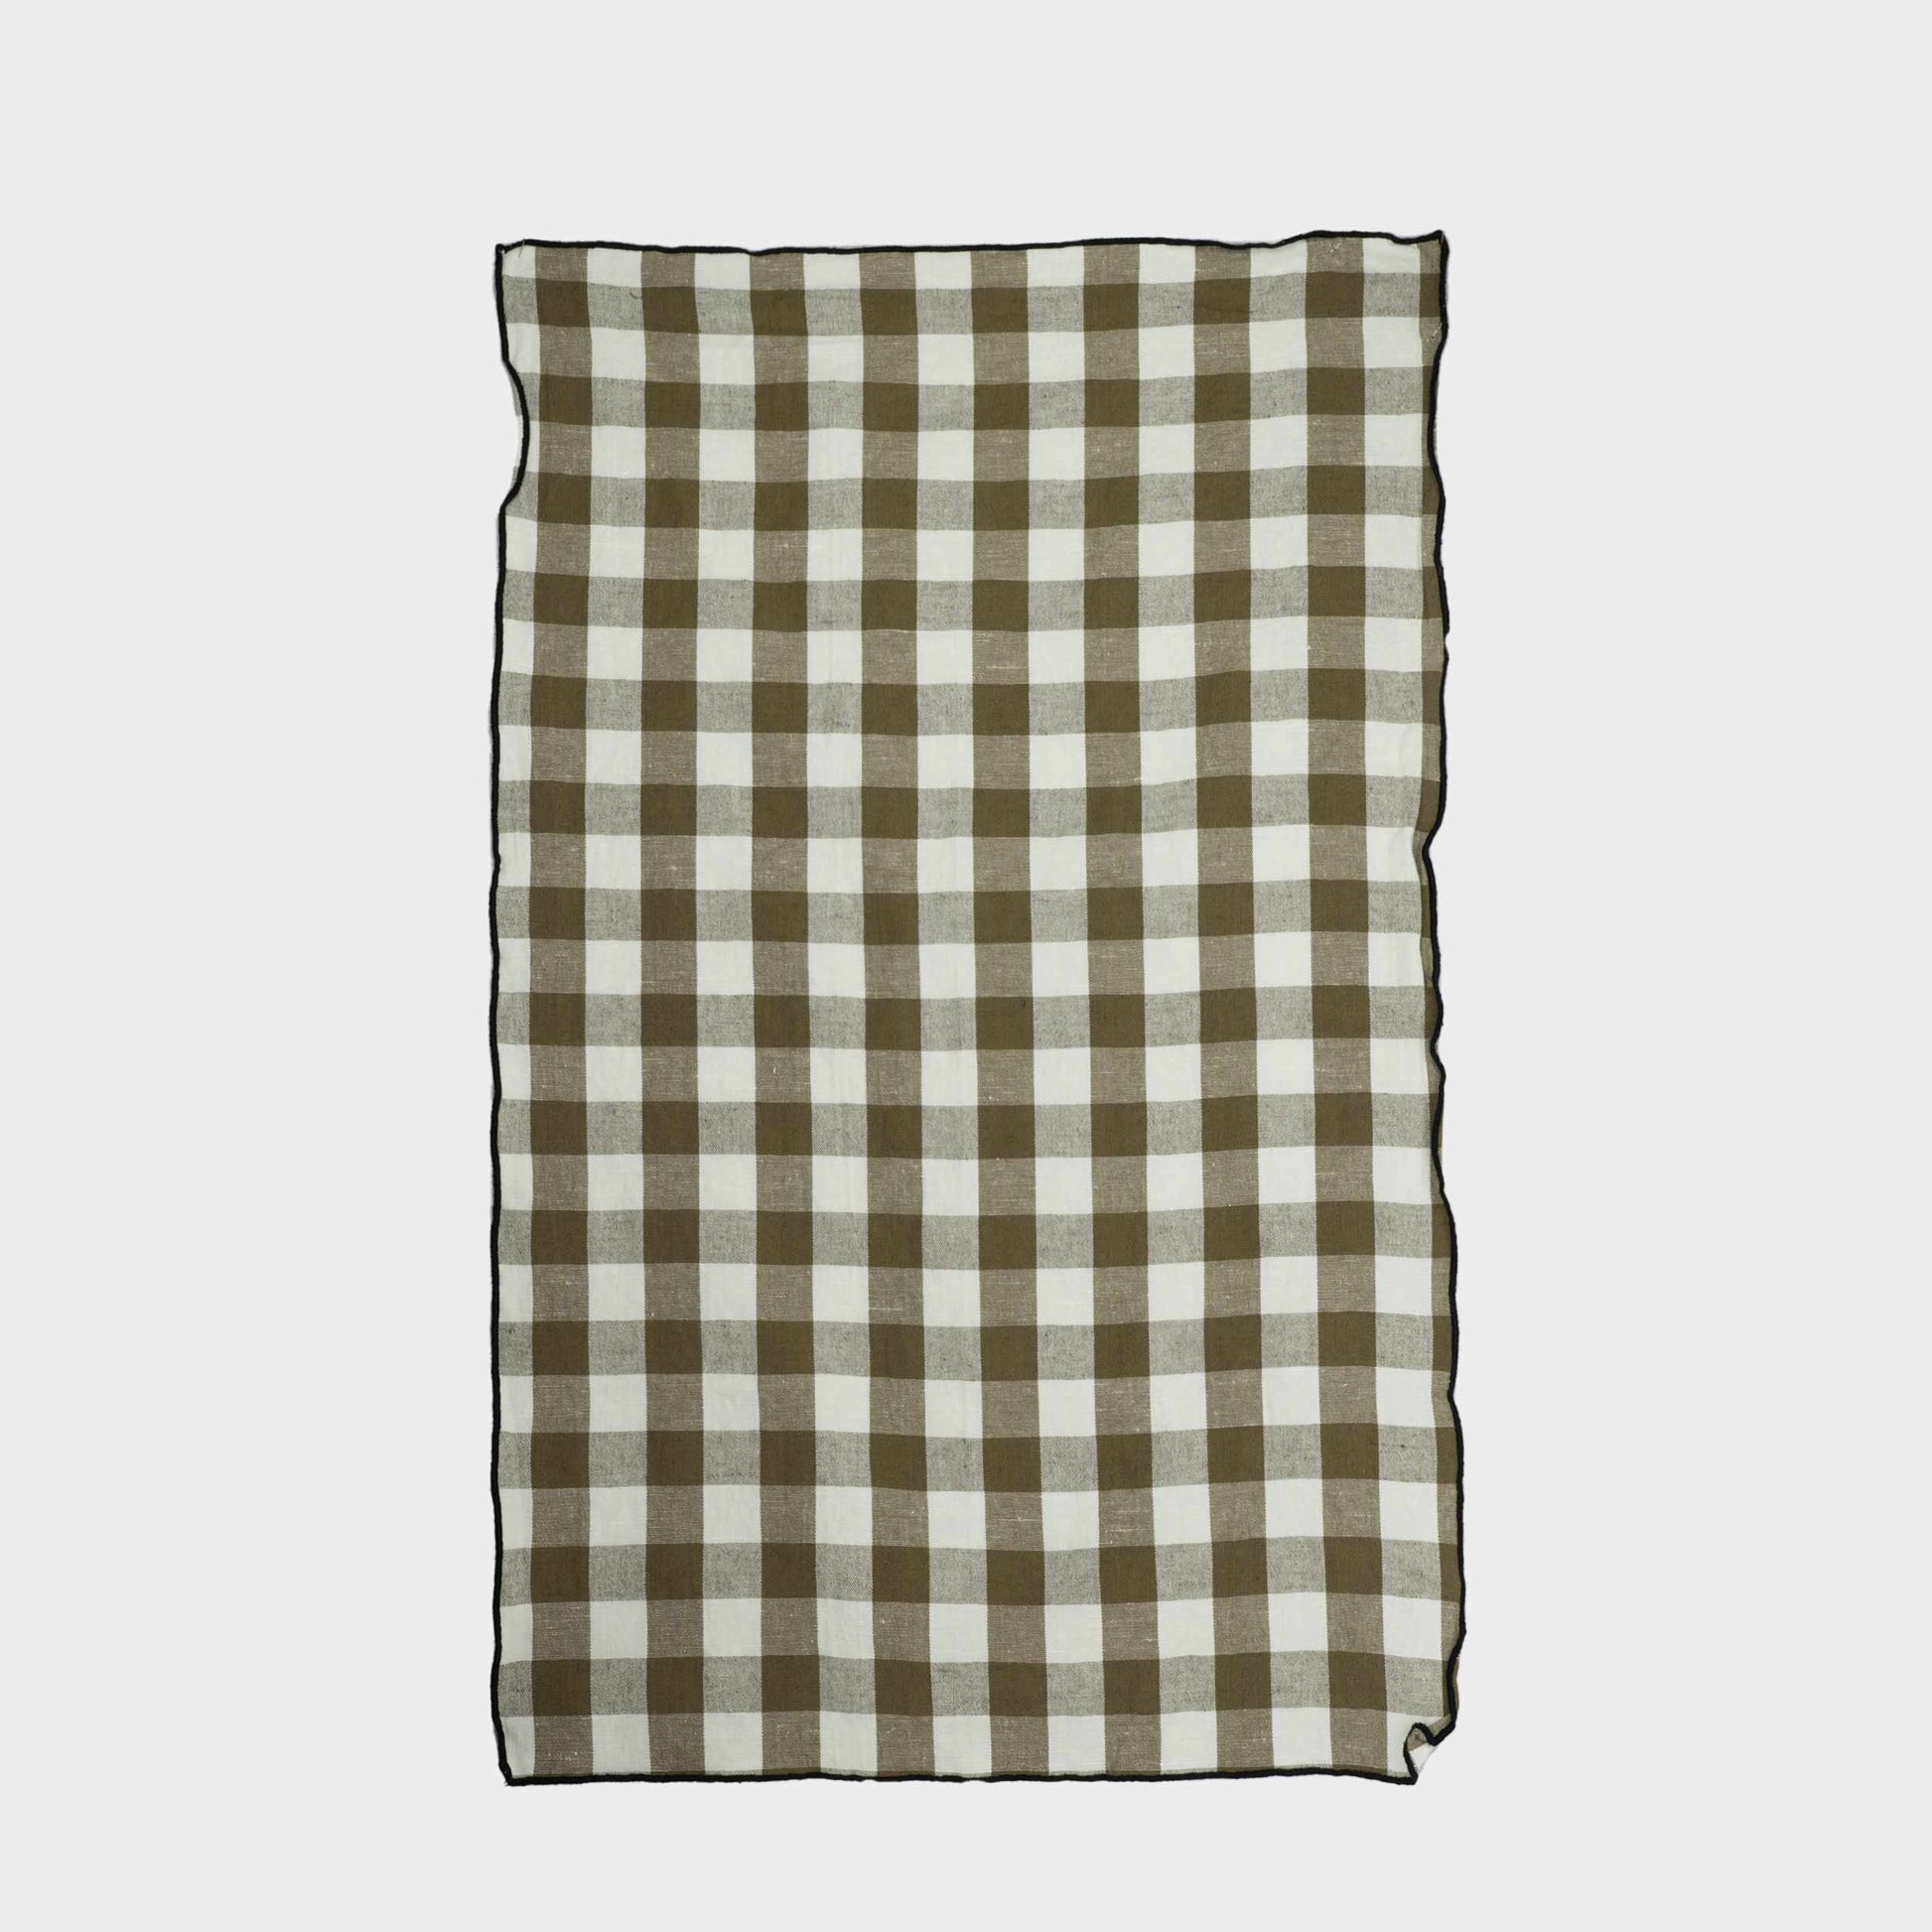 French Linen and Cotton Kitchen Towel in Gingham